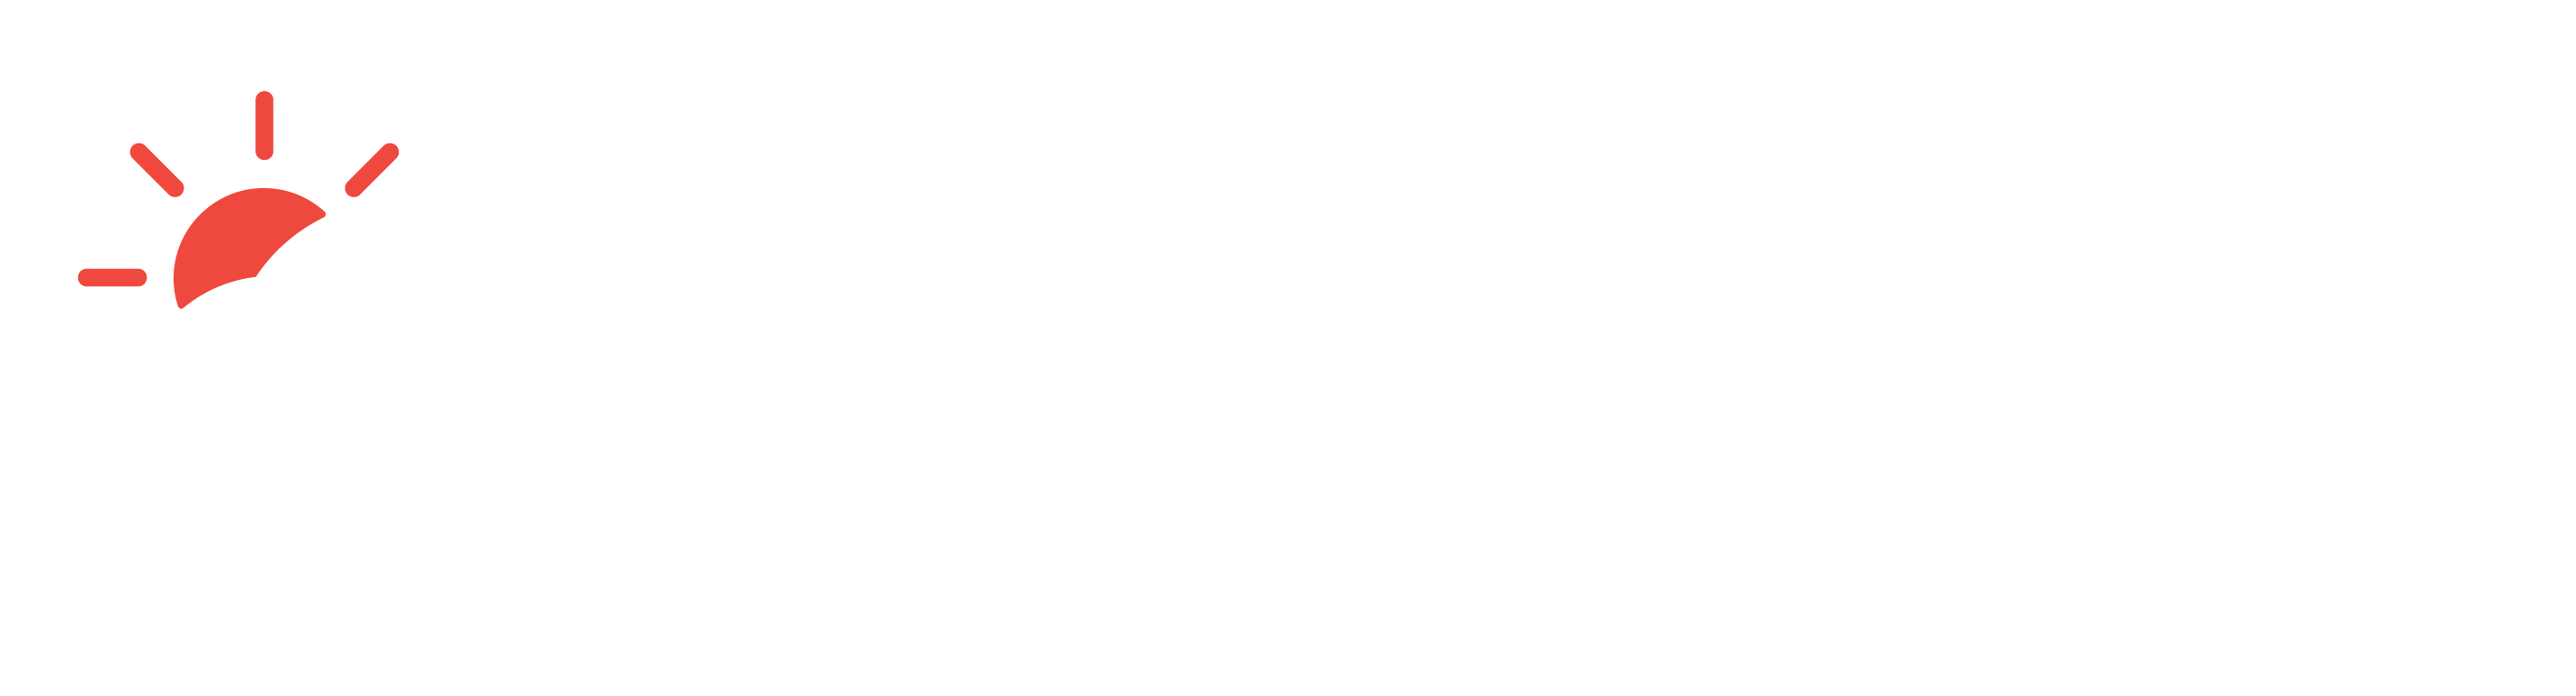 Travel Experts